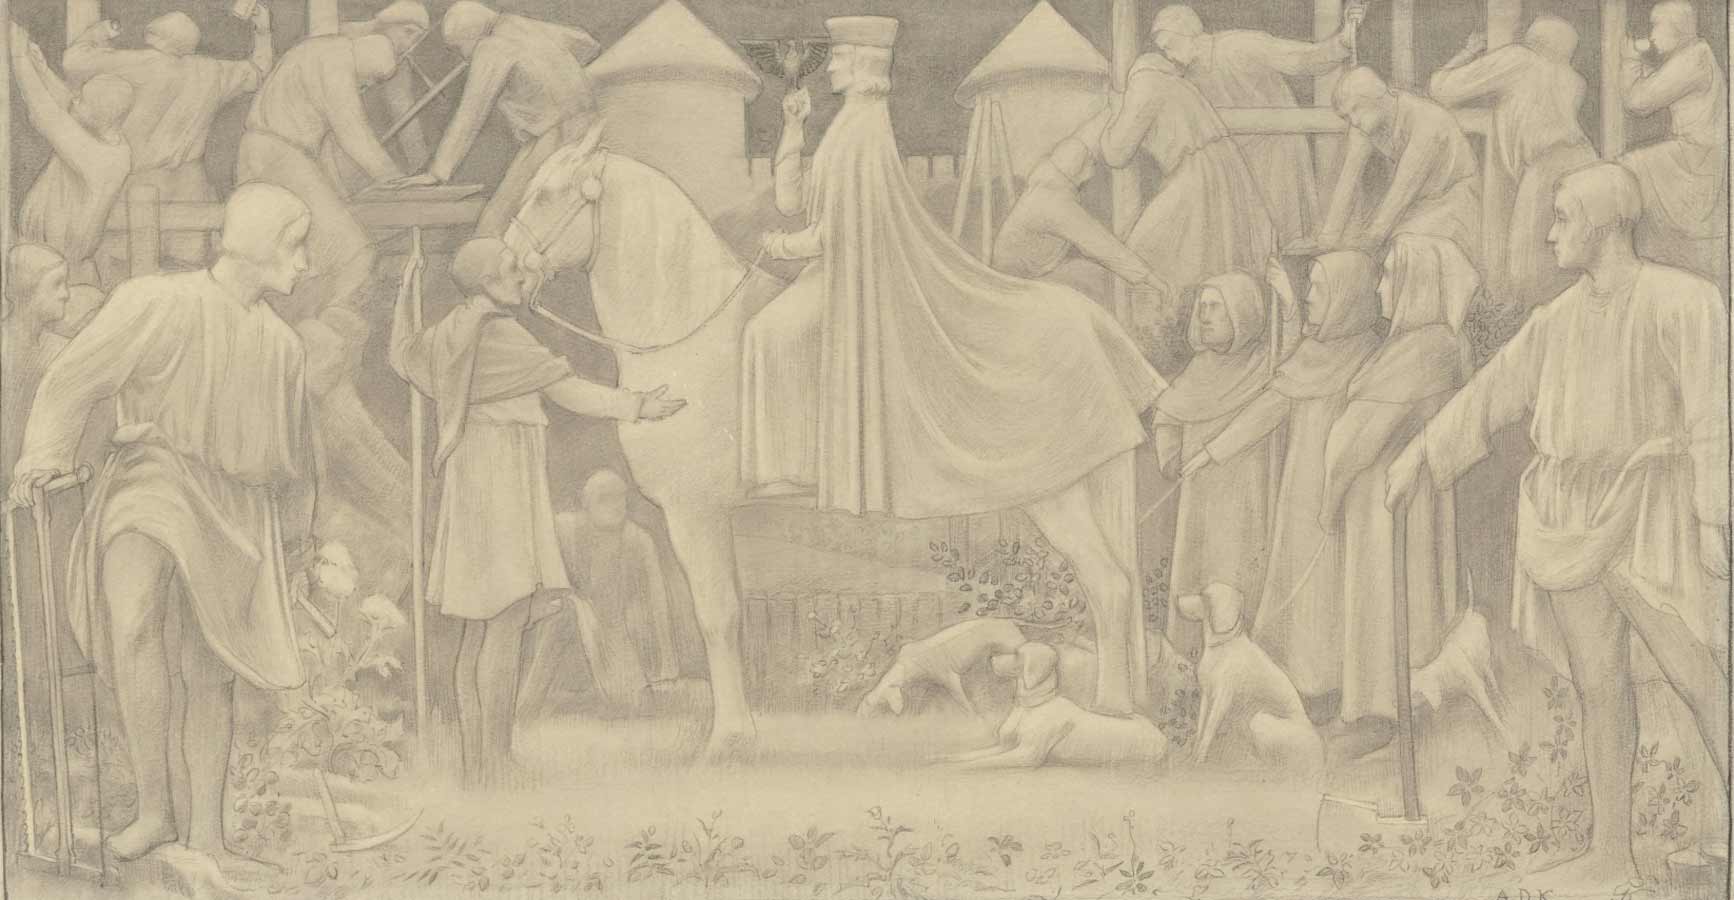 Fig. 8 Antoon Derkinderen, Design for the First Bossche Wall: the Founding of ’s-Hertogenbosch by Duke Henry of Brabant, 1889-1891. Black chalk on paper, 32.5 × 57.1 cm. Rijksmuseum, Amsterdam, gift of the heirs of J.D. van der Waals, Amsterdam, 1971. The word community art is first used in the Netherlands in connection with this wall painting. Reviewer Flanor (pseud. P.A.M. Boele van Hensbroek), in De Nederlandsche Spectator (1892), p. 72, speaks of the “newly forged word ‘community art.’”